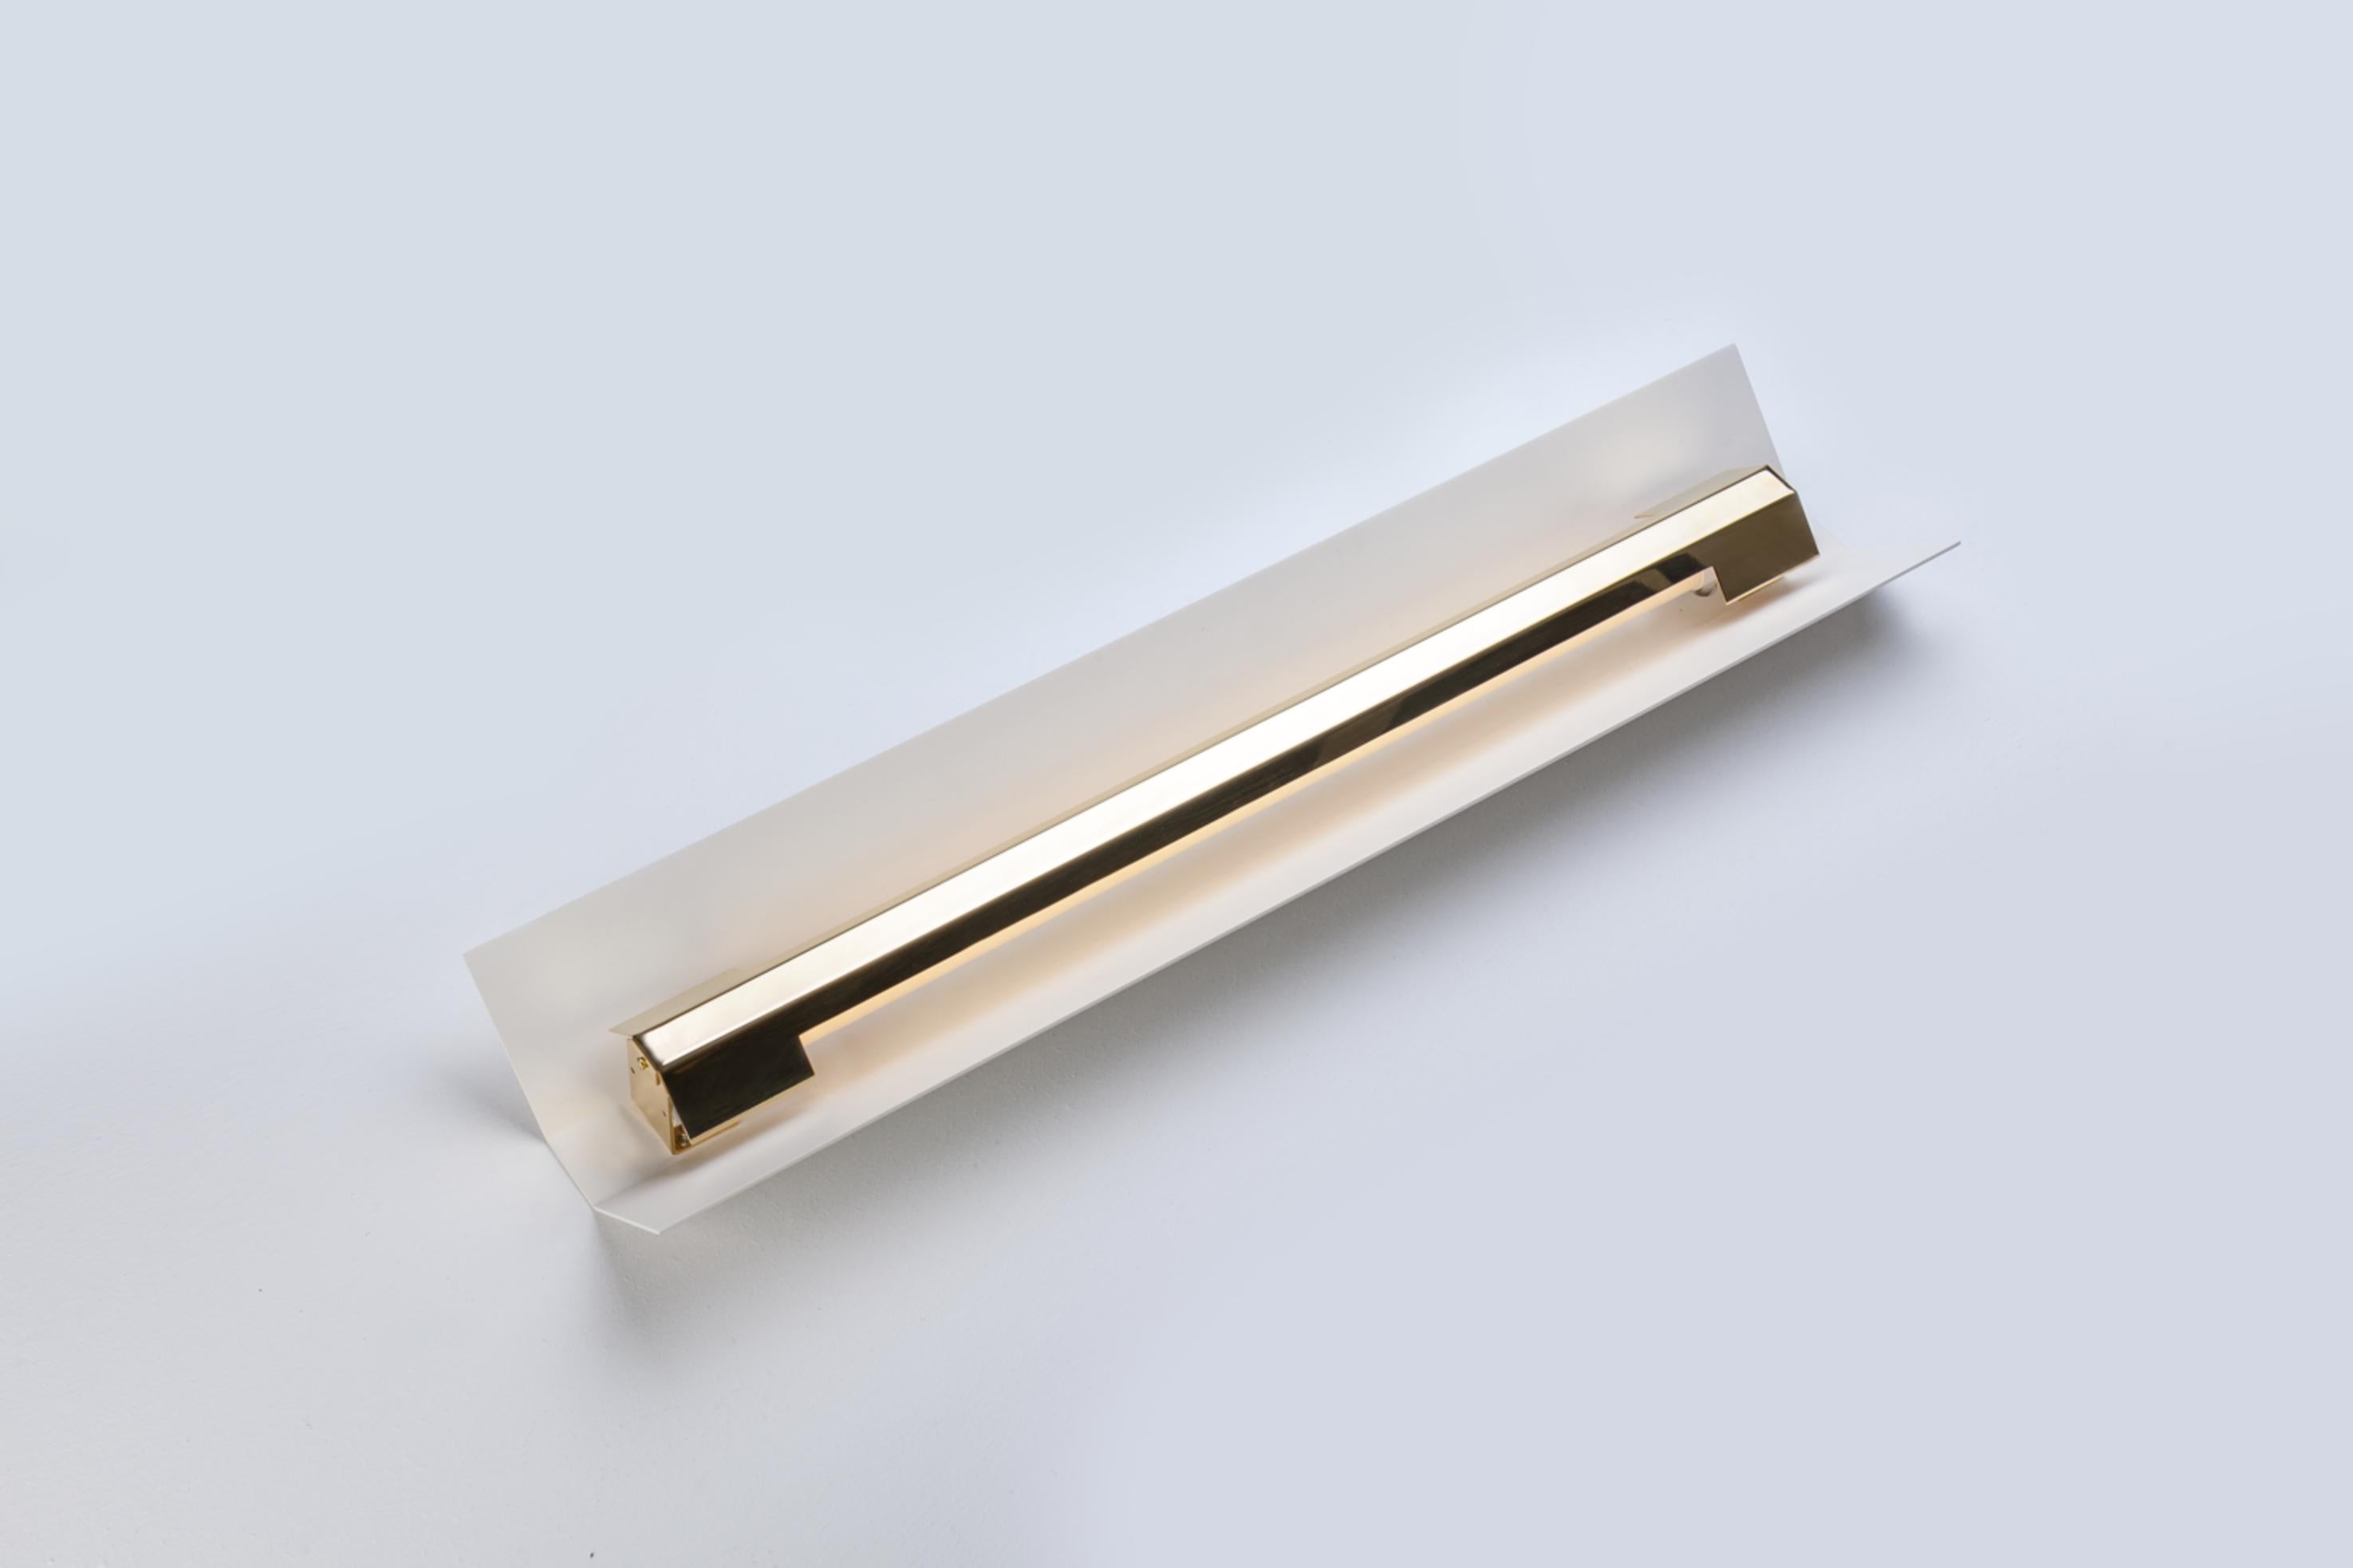 Large misalliance Ex pure white wall light by Lexavala.
Dimensions: D 16 x W 130 x H 8 cm.
Materials: powder coated shade with details made of brass or stainless steel.

There are two lenghts of socket covers, extending over the LED. Two short